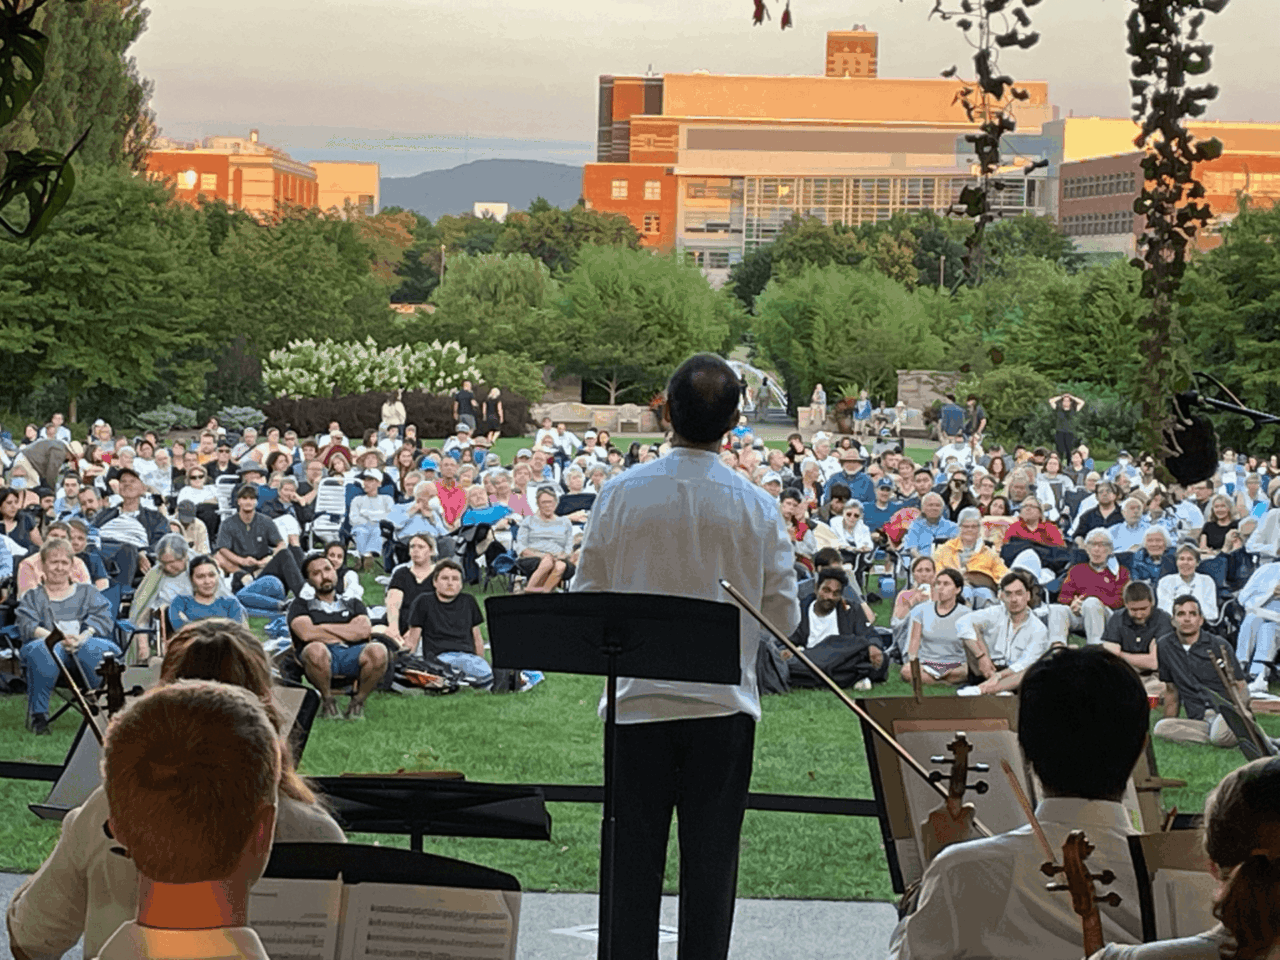 View of an audience outside on a lawn enjoying the sounds of the Penn's Wood Music Festival orchestra.